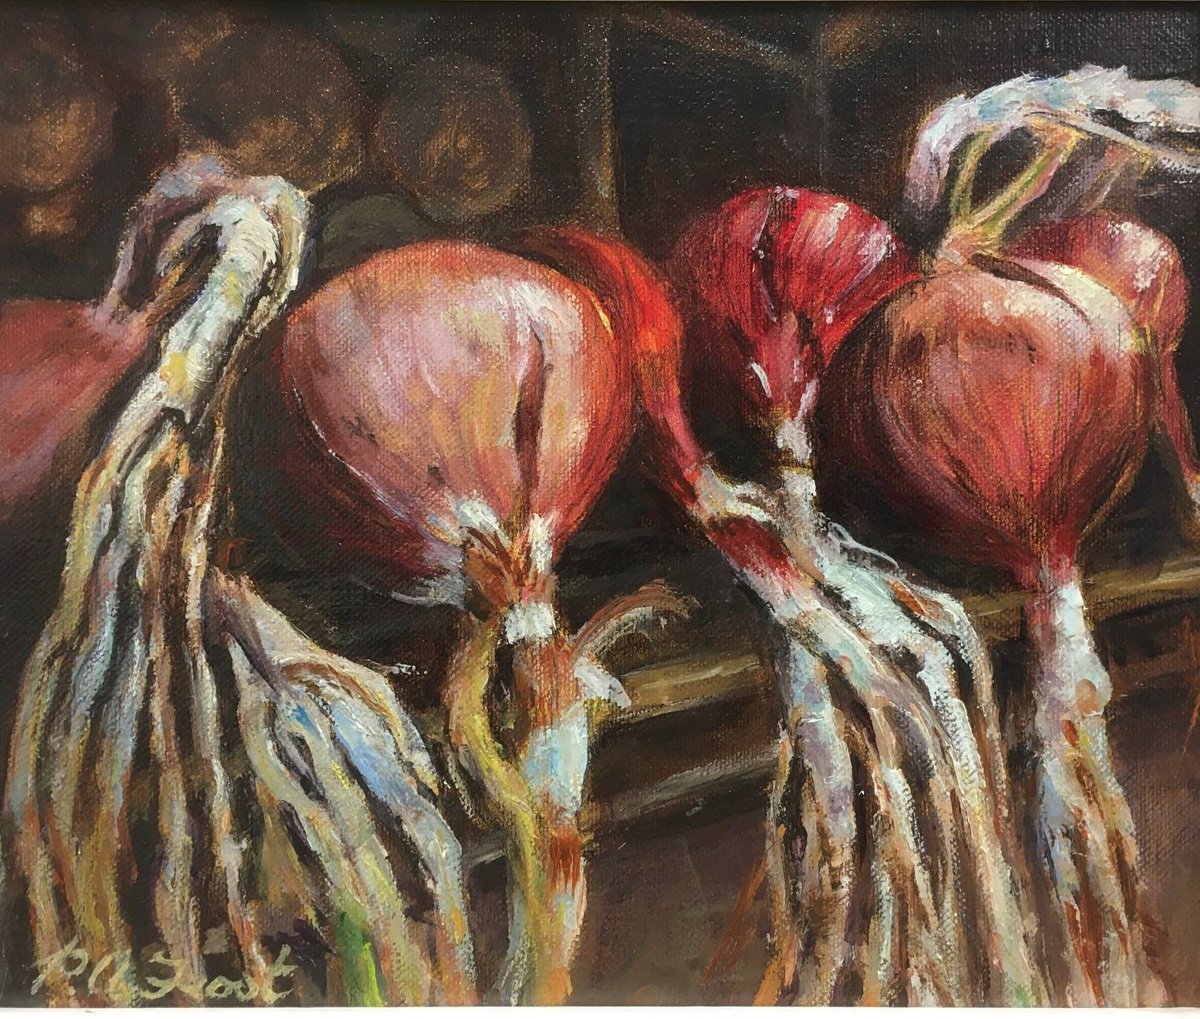 Red Onions drying by Peter Frost